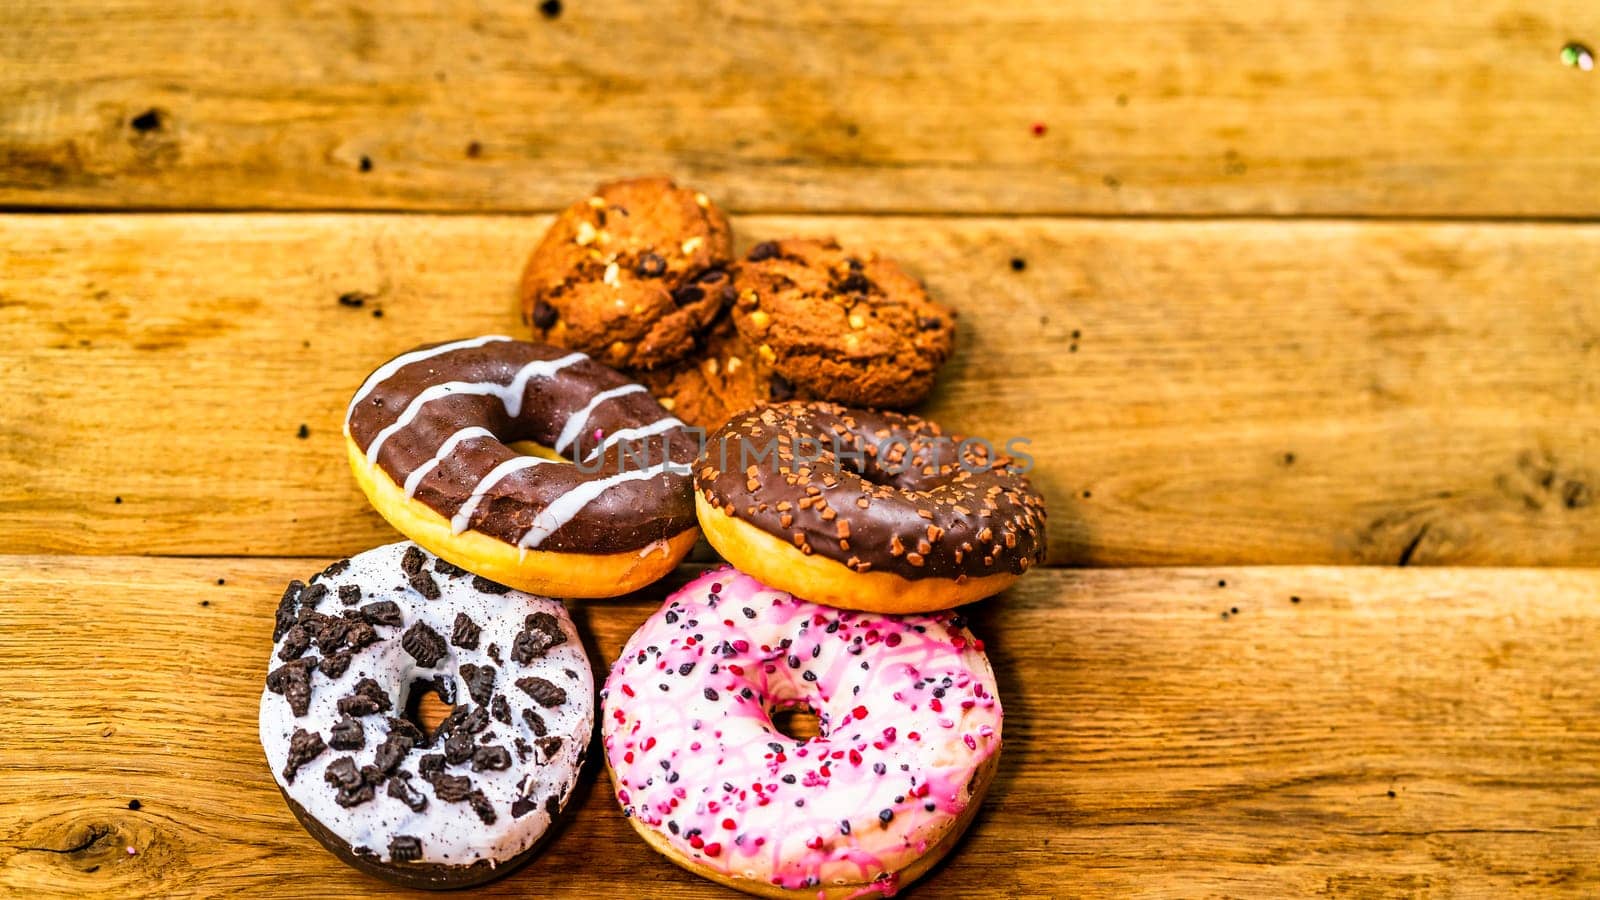 Colorful donuts and biscuits on wooden table. Sweet icing sugar food with glazed sprinkles, doughnut with chocolate frosting. Top view with copy space by vladispas